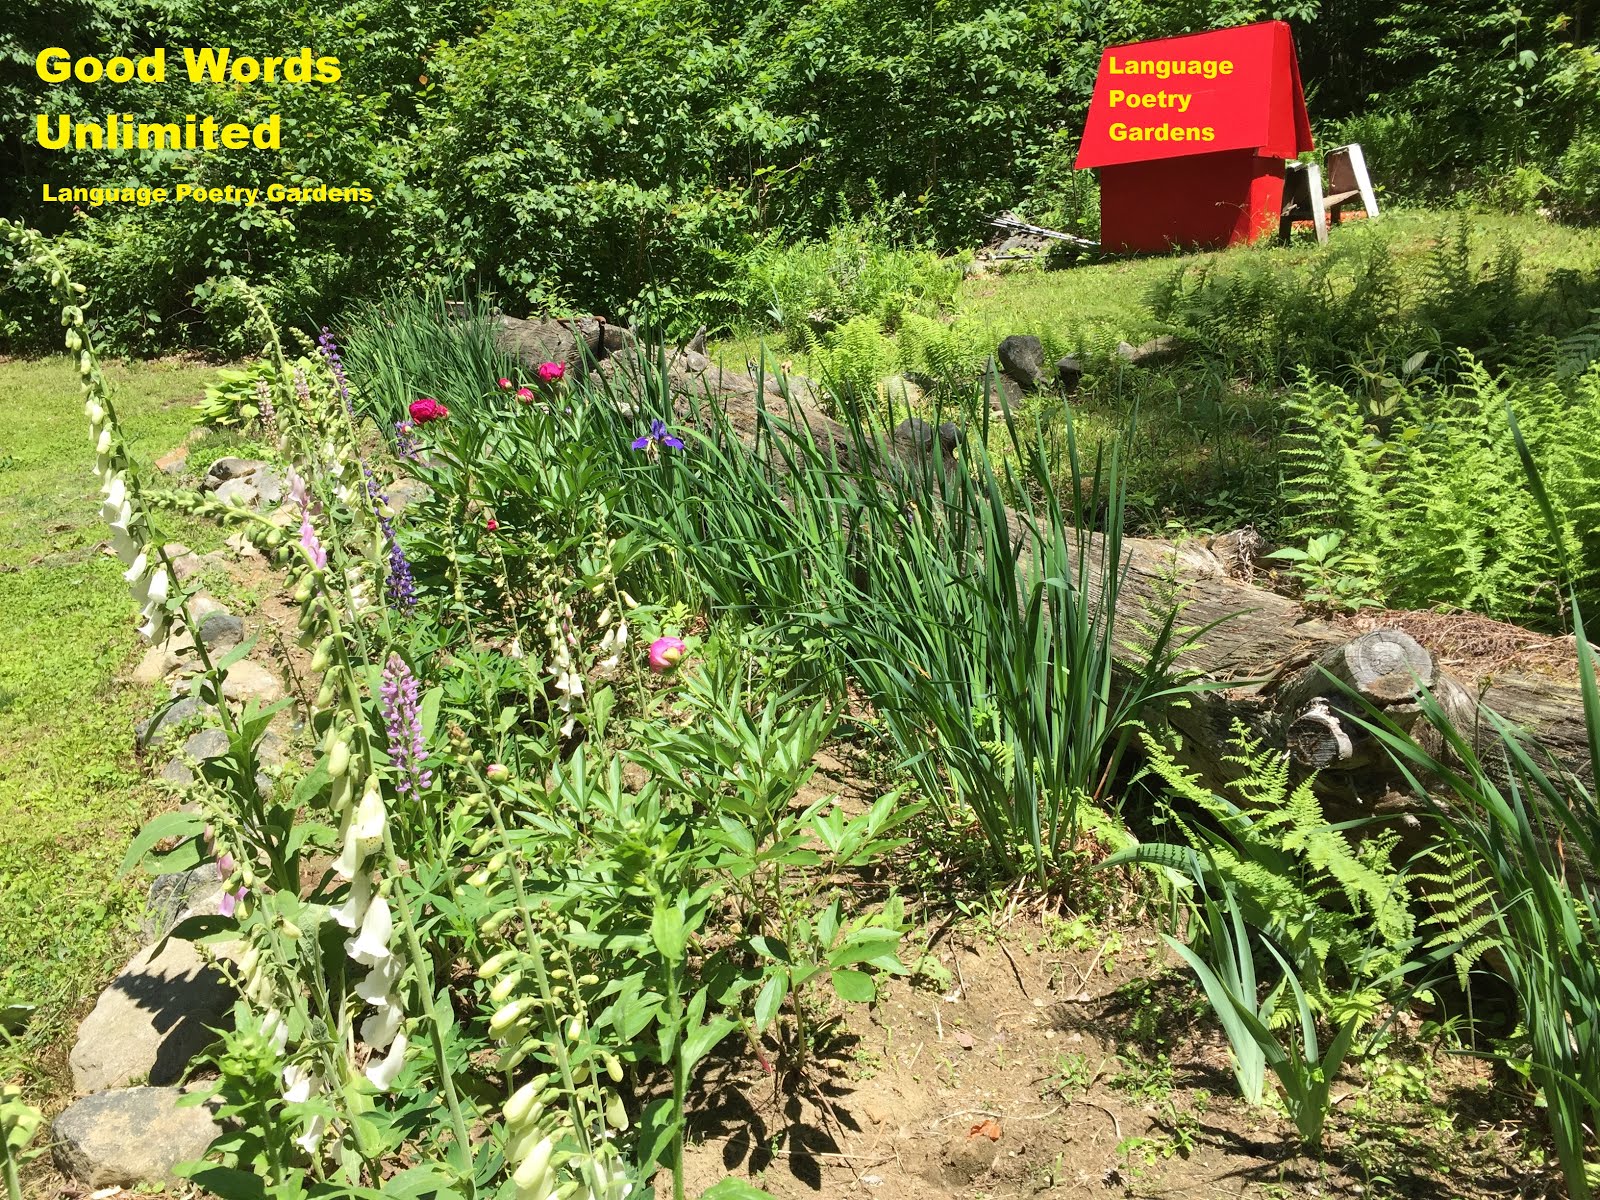 Good Words Unlimited--Language, Poetry, Gardens